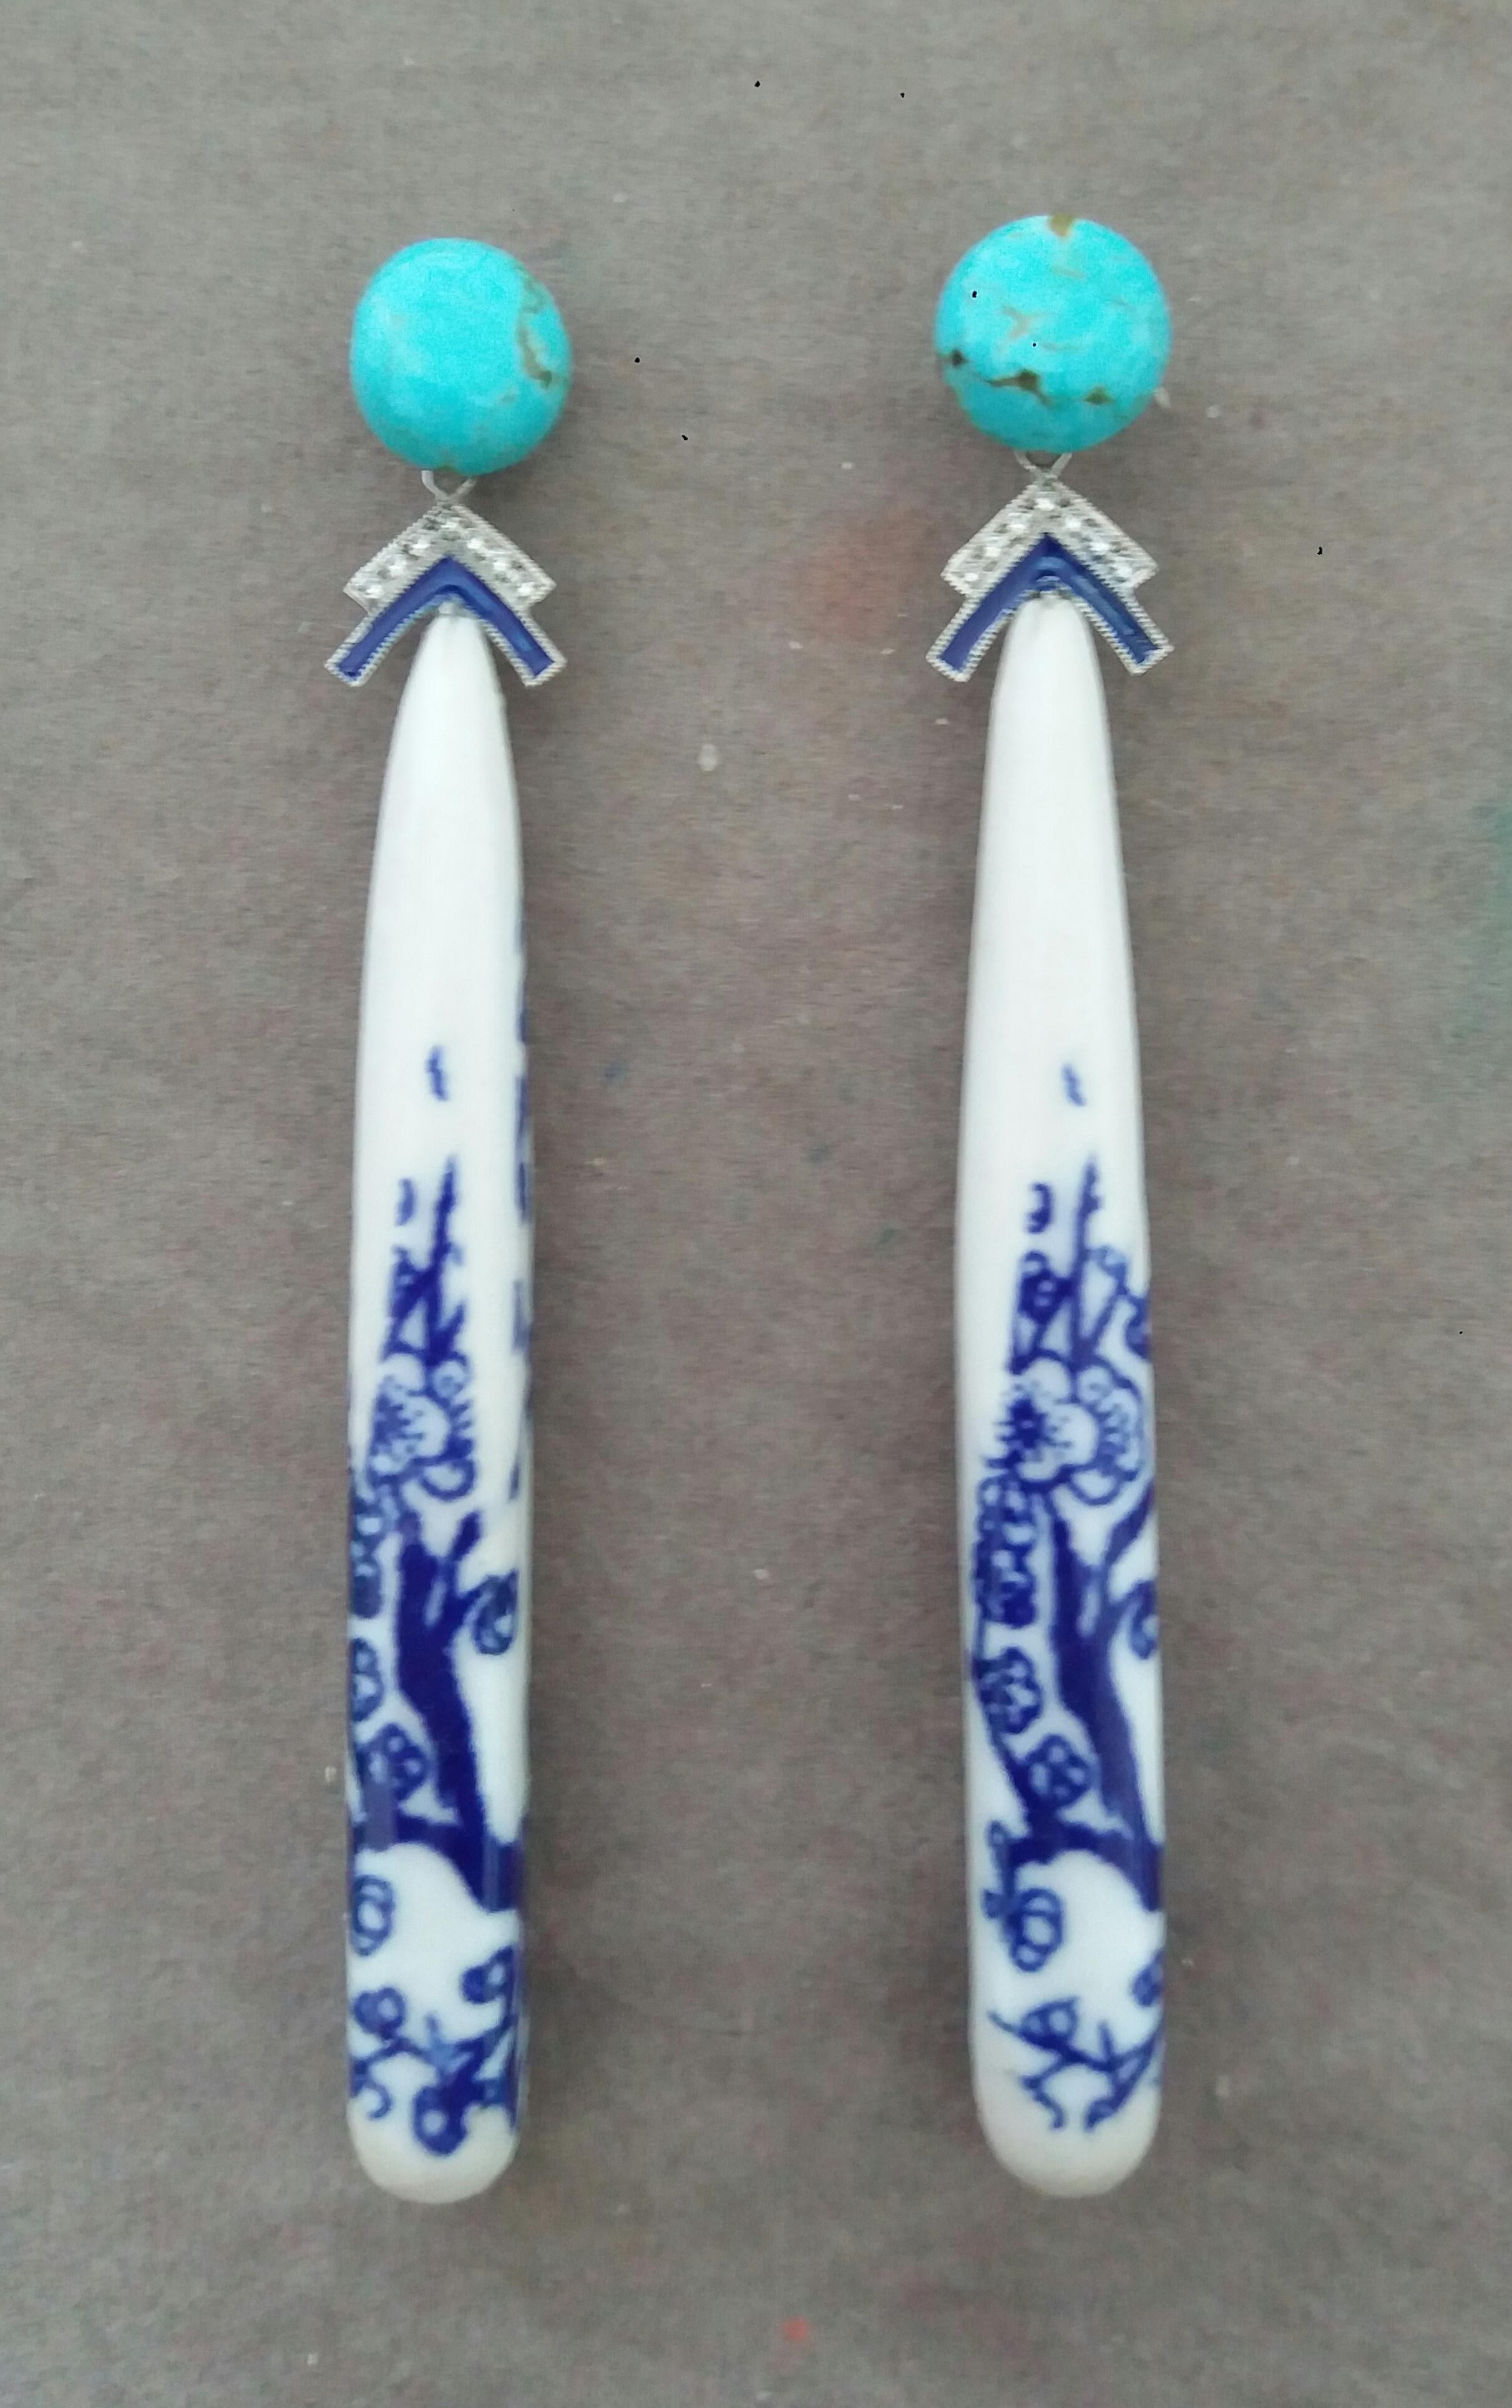 In these Unique Earrings we have 2 Chinese Ceramic Drops 70 mm. long ,depicting a floral patterns , suspended to 2 Genuine Turquoise  buttons of 10 mm in diameter and 2 elements in white gold, blue enamels and 14 small full cut diamonds.

In 1978